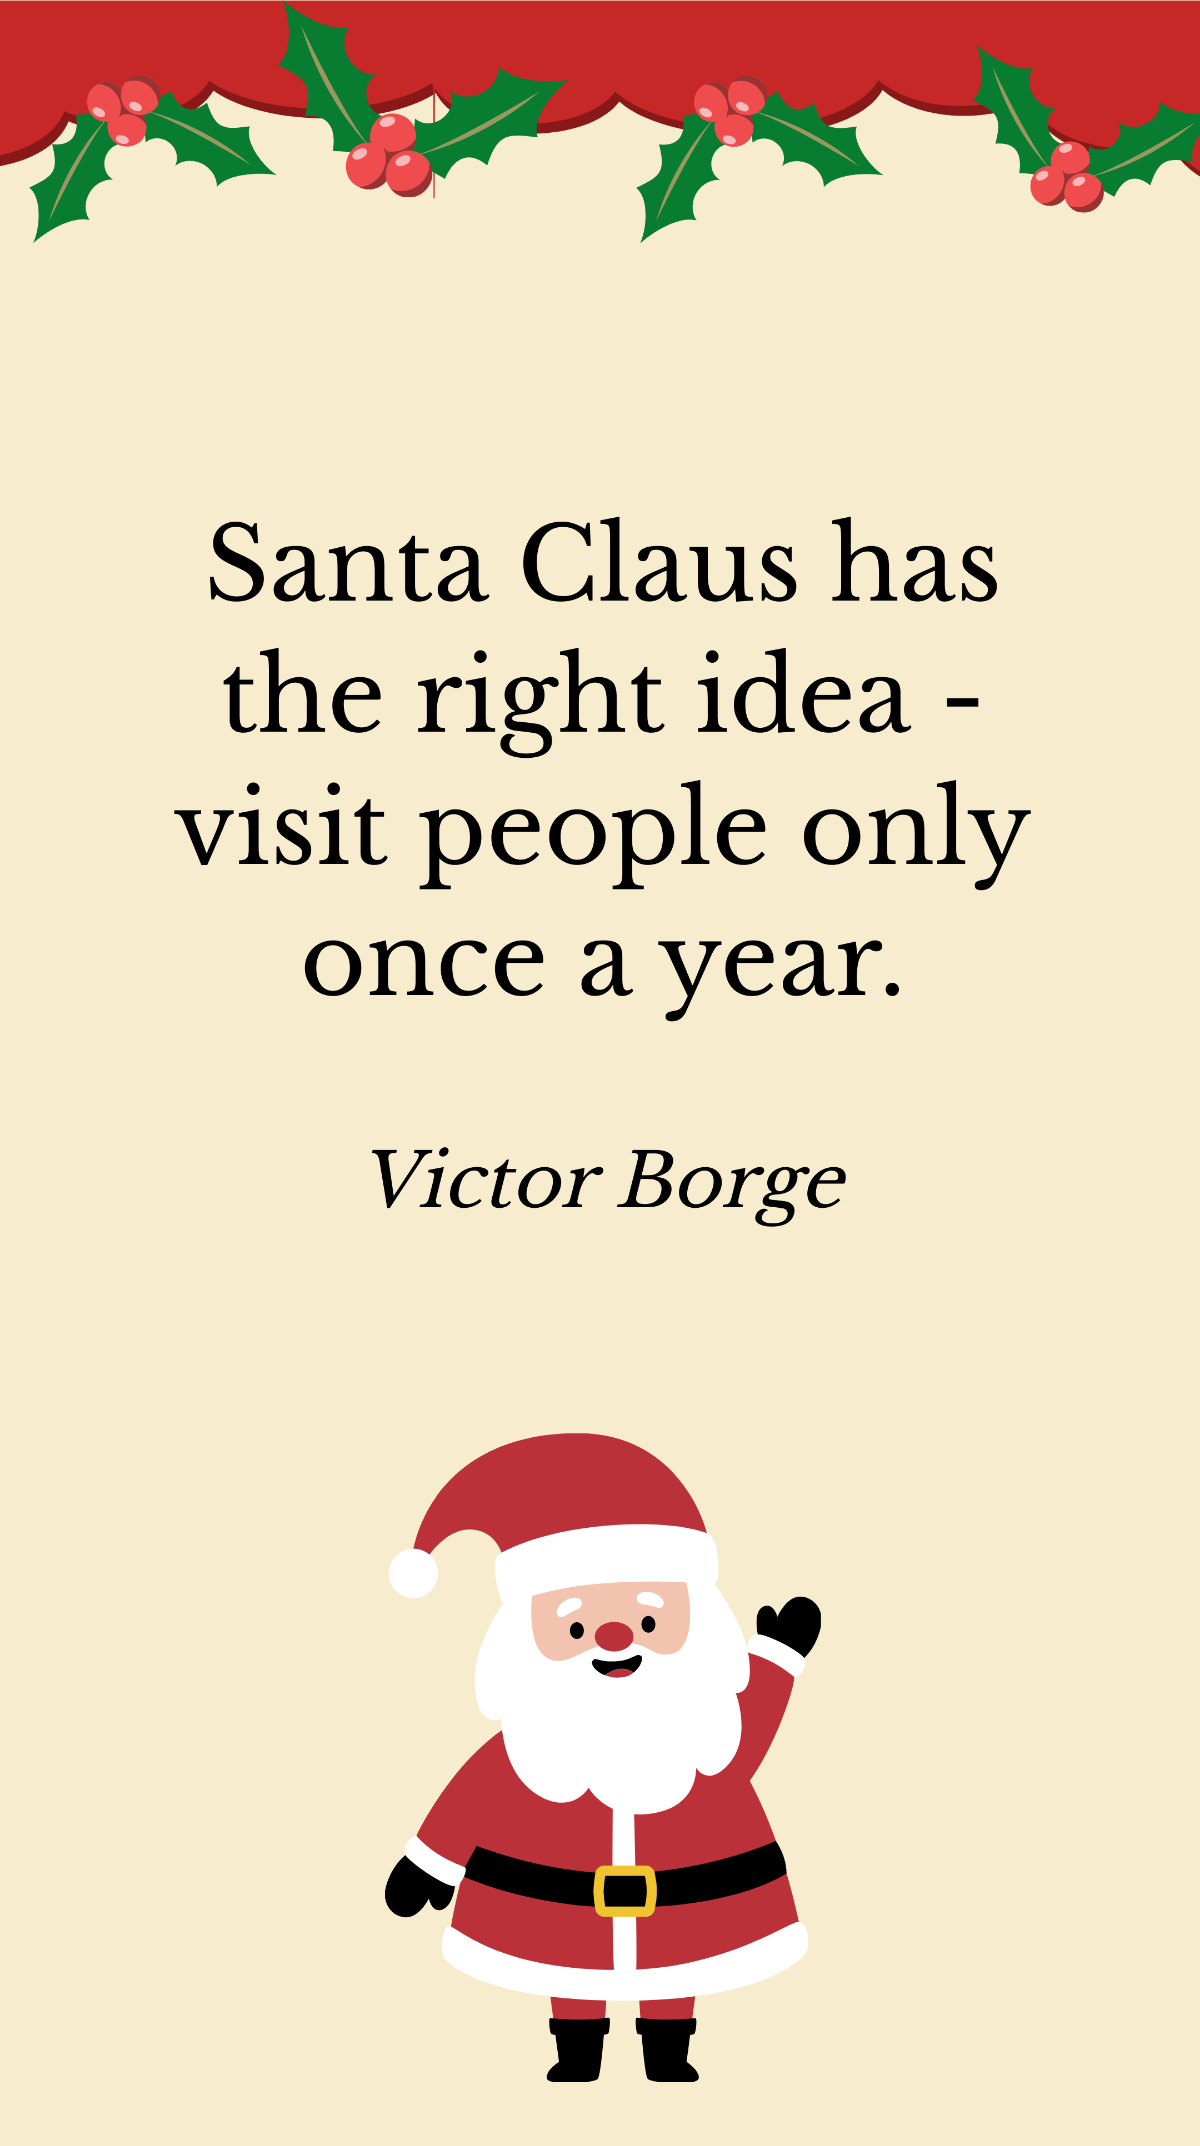 Victor Borge - Santa Claus has the right idea - visit people only once a year. Template